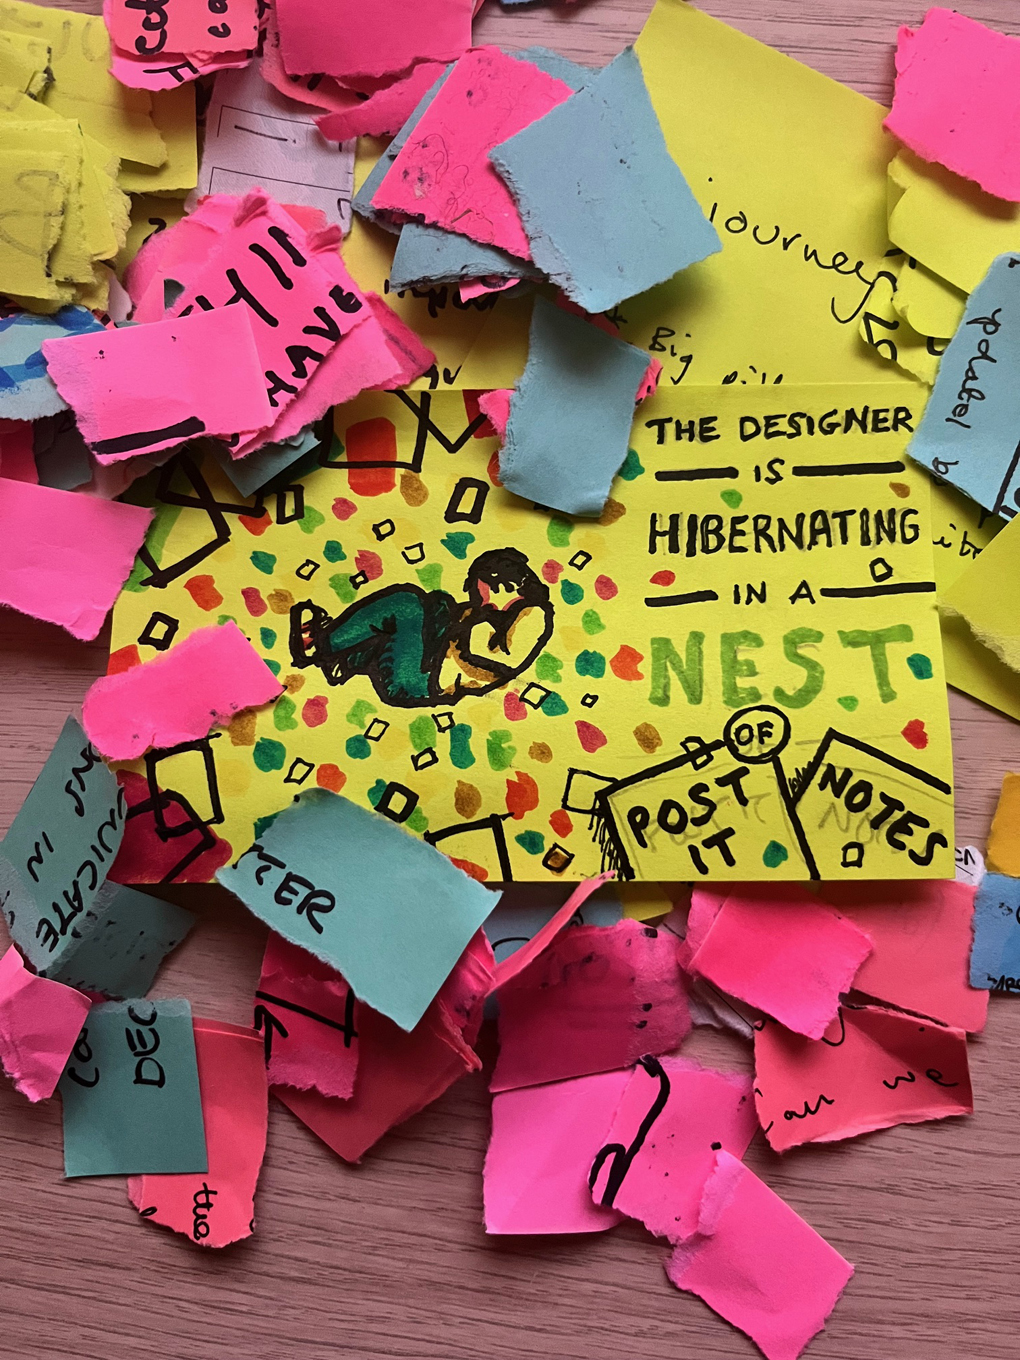 A pile of multi-coloured, torn-up post it note. In the middle of the pile is a drawing of a person curled up asleep. Next to the sleeping person there is text that reads “The designer is hibernating in a nest of post-it notes”